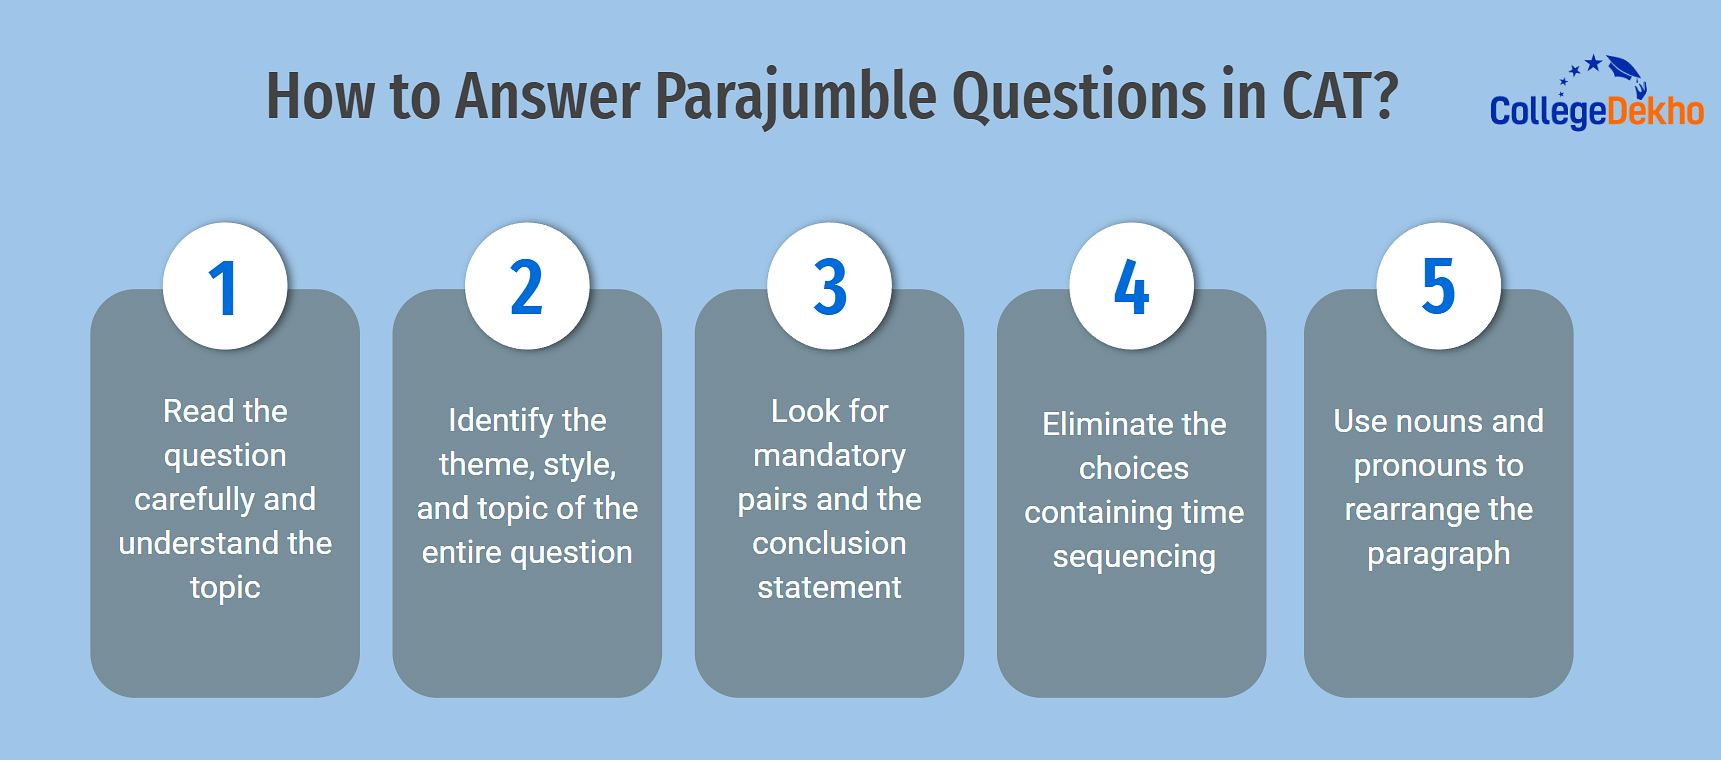 How to Answer ParaJumble Questions in CAT